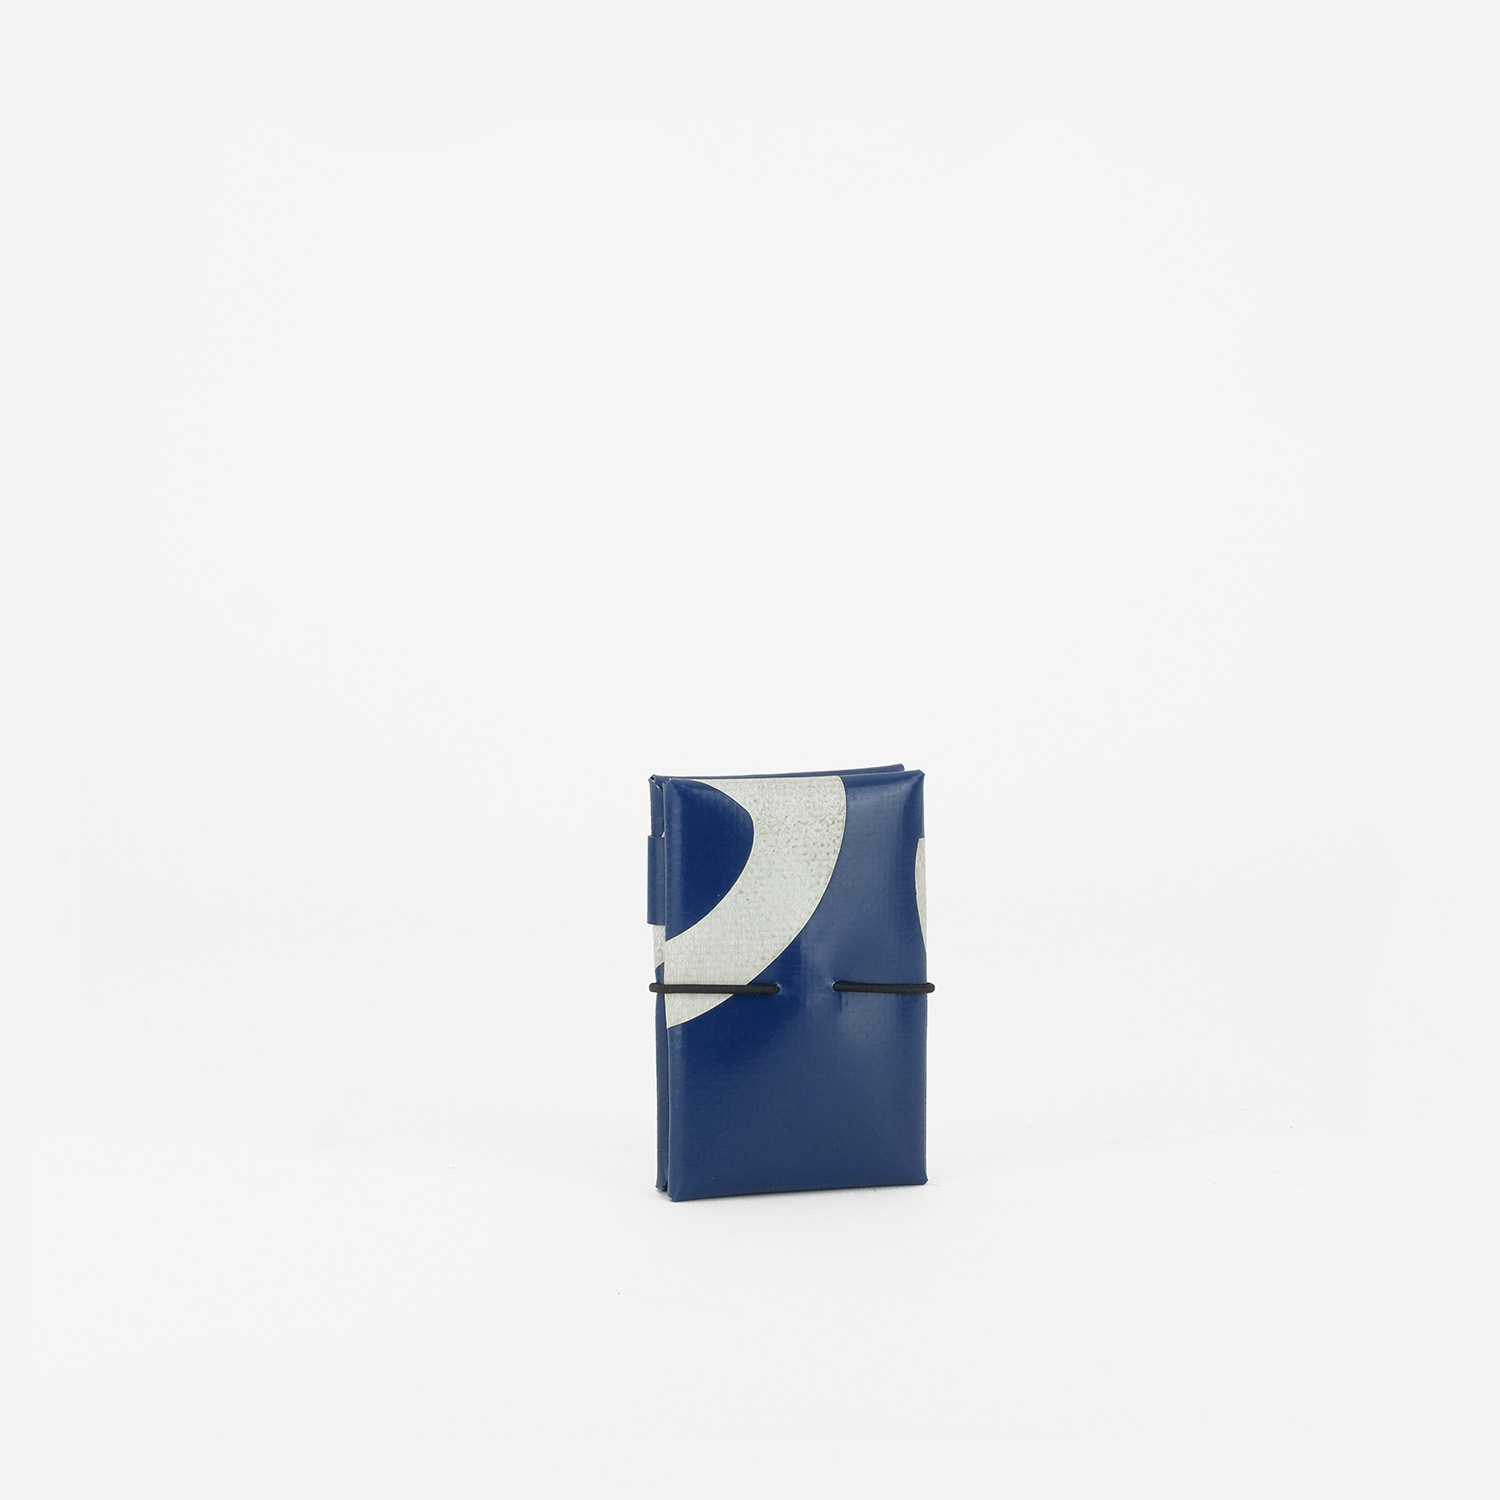 FREITAG :: F233 PAT :: With two inner compartments for storing up to 12 ...